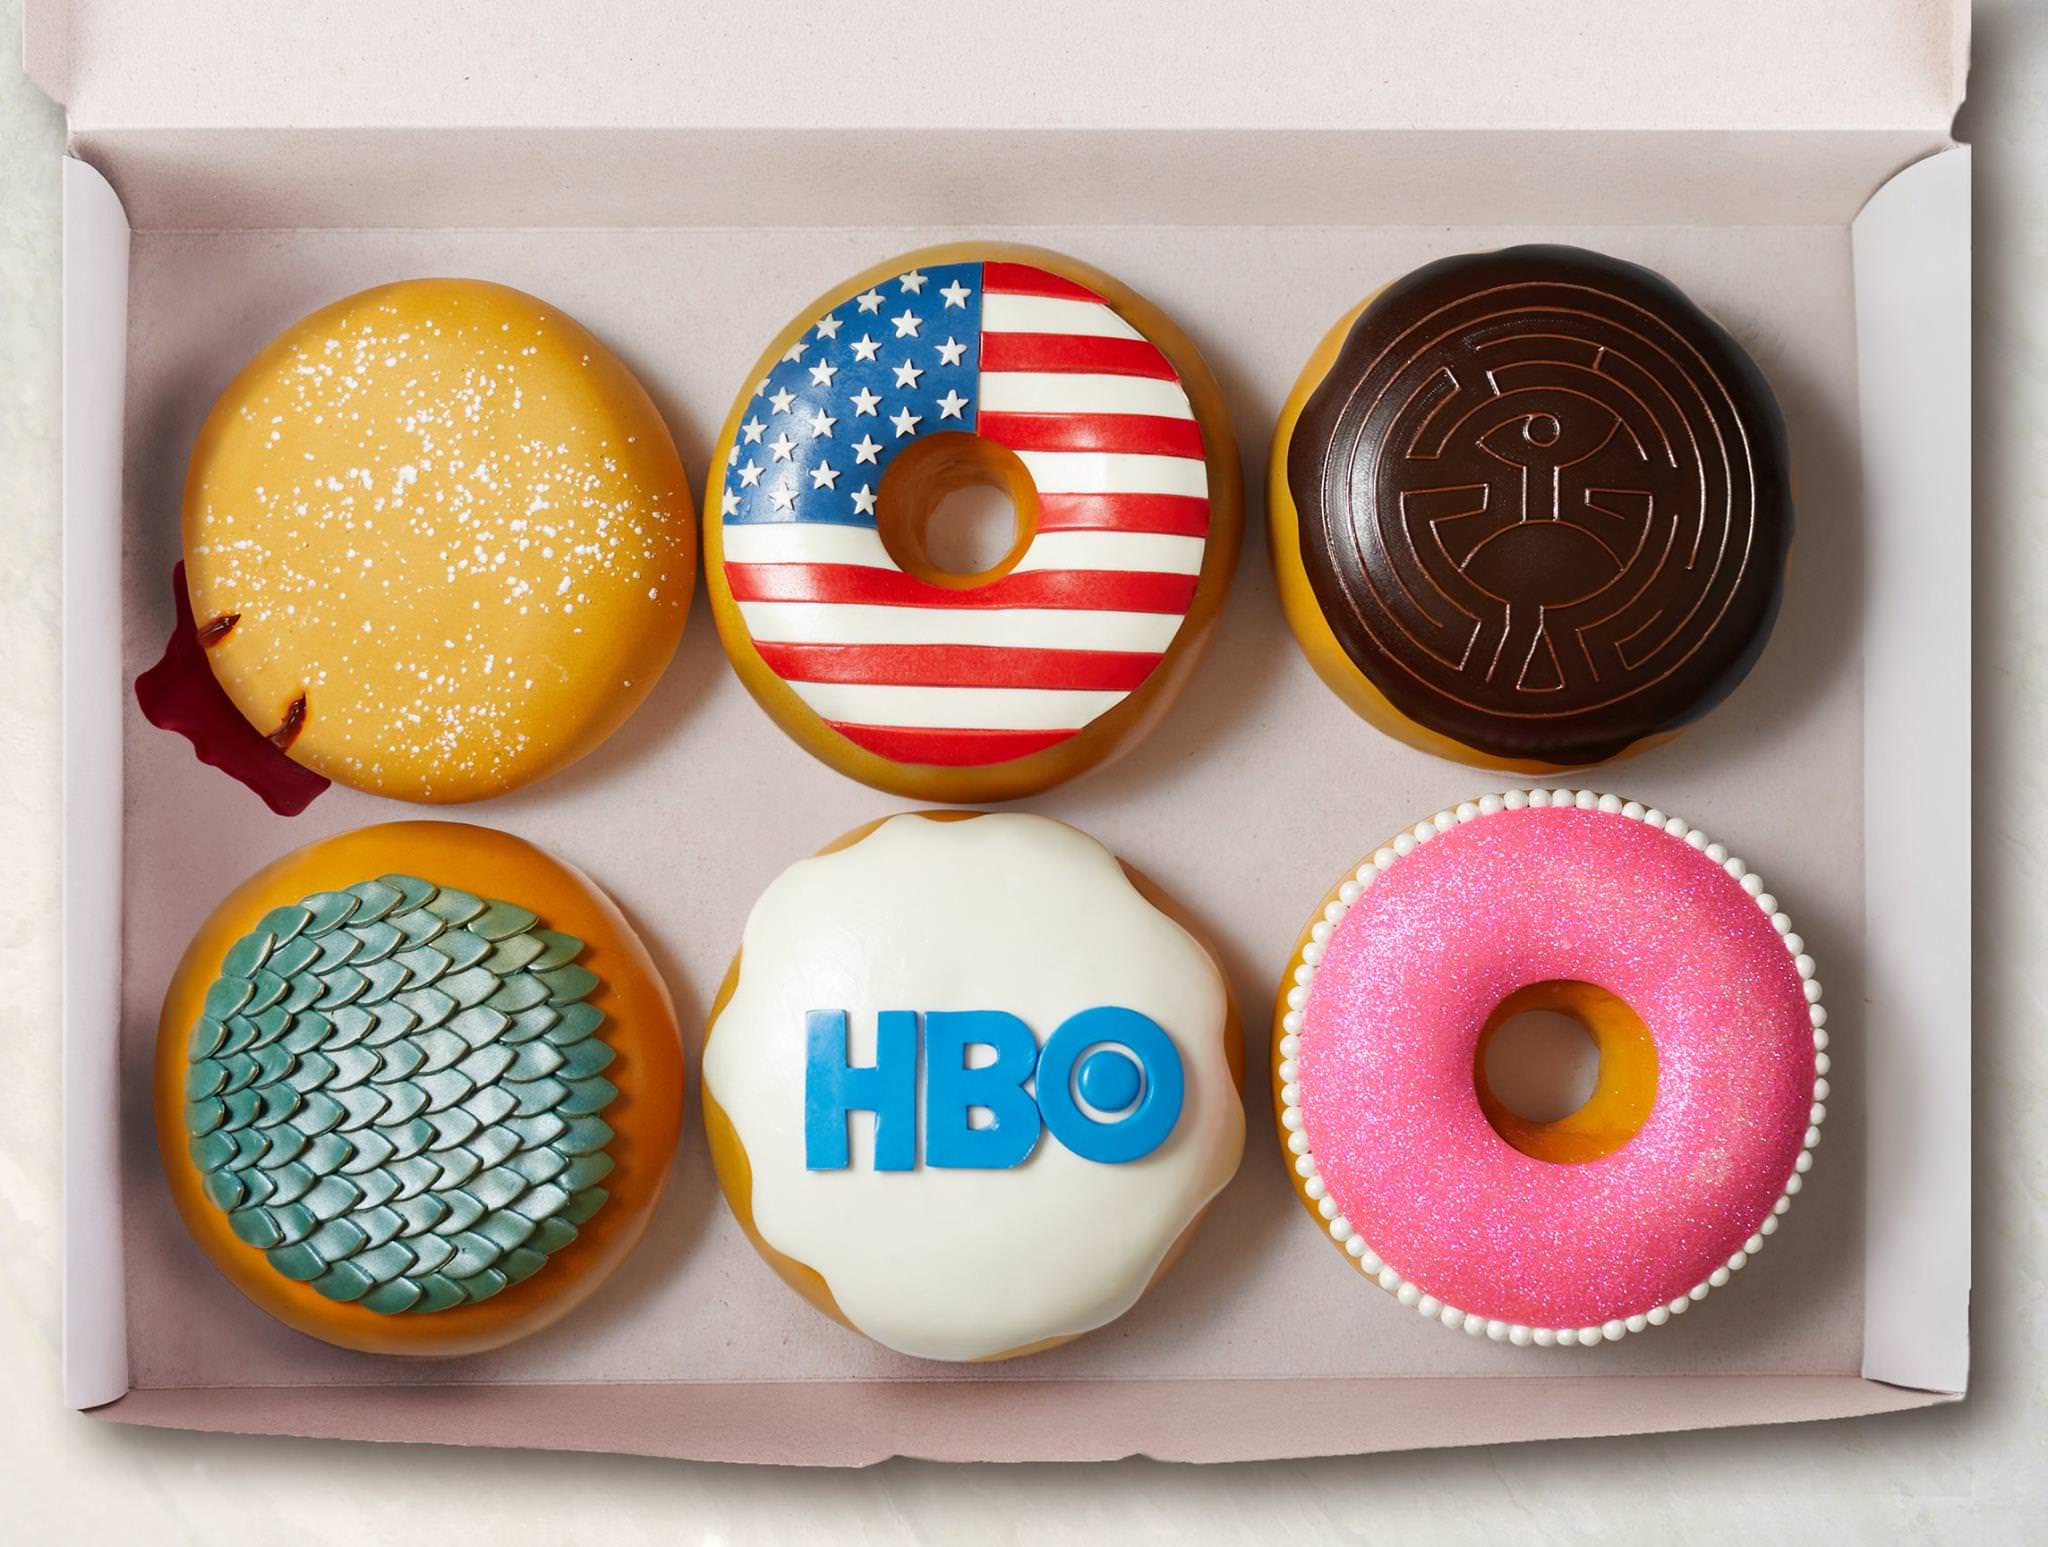 Donuts that say "HBO"